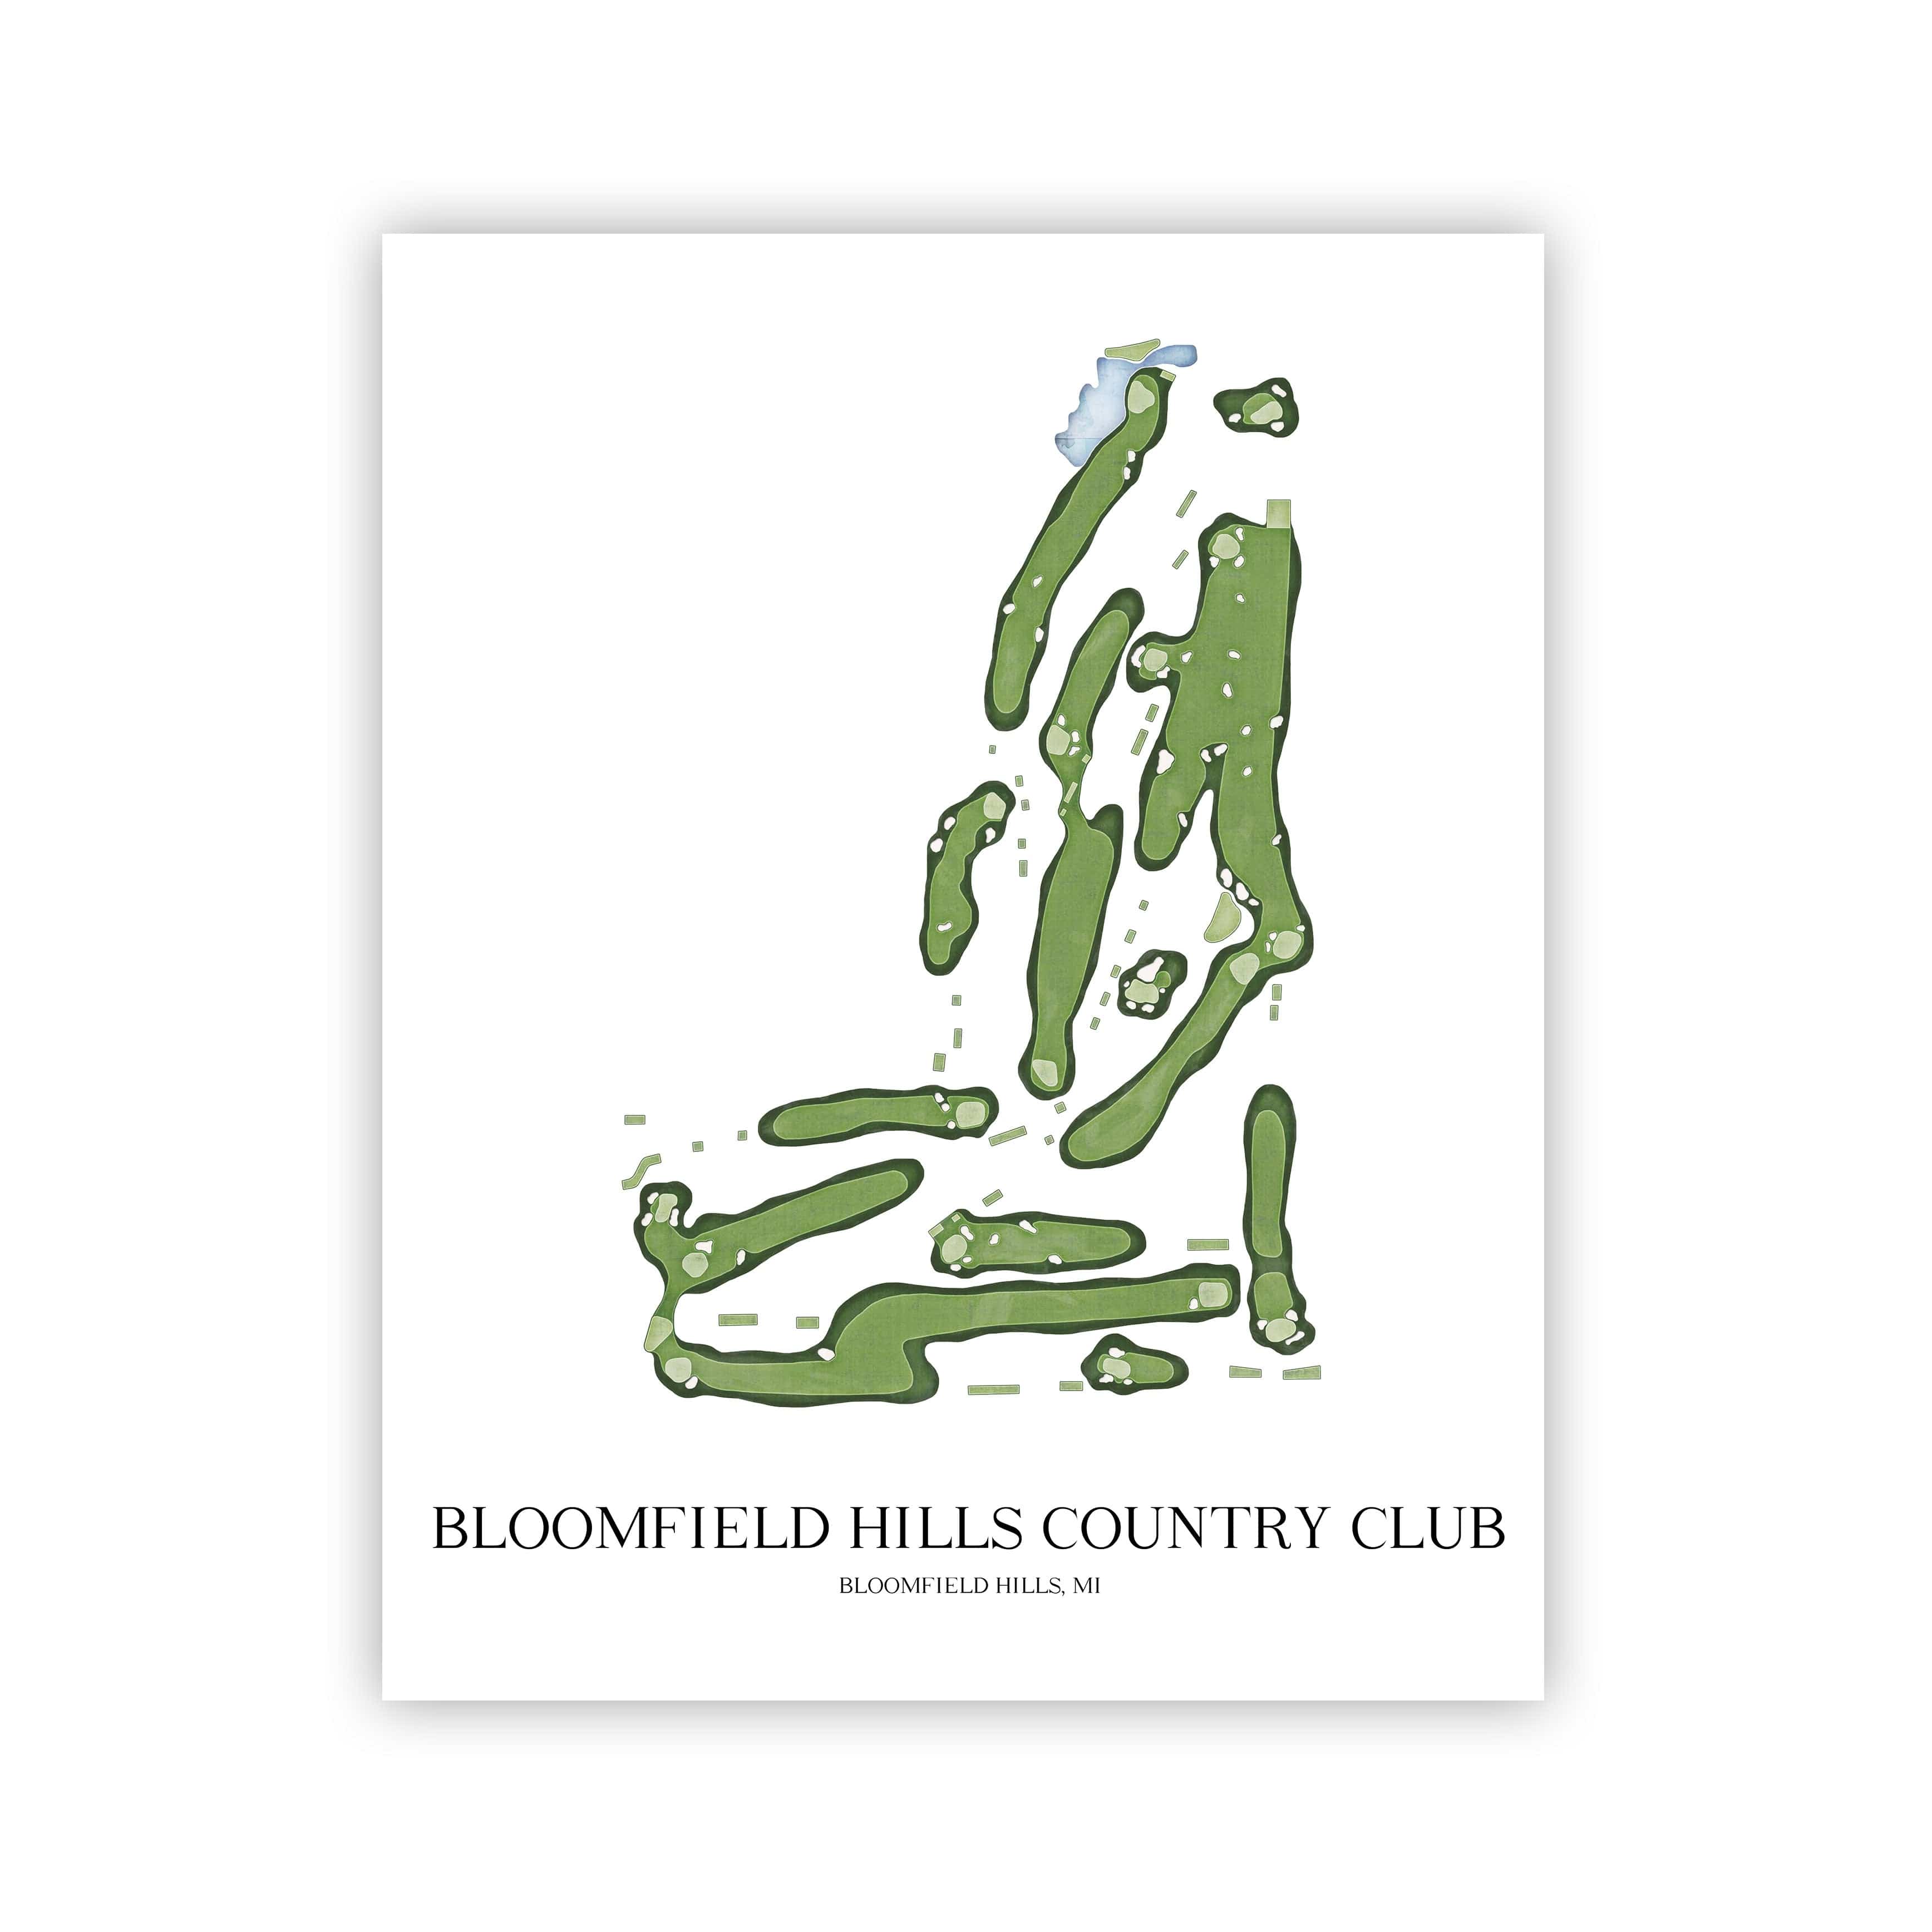 The 19th Hole Golf Shop - Golf Course Prints -  Bloomfield Hills Country Club Golf Course Map